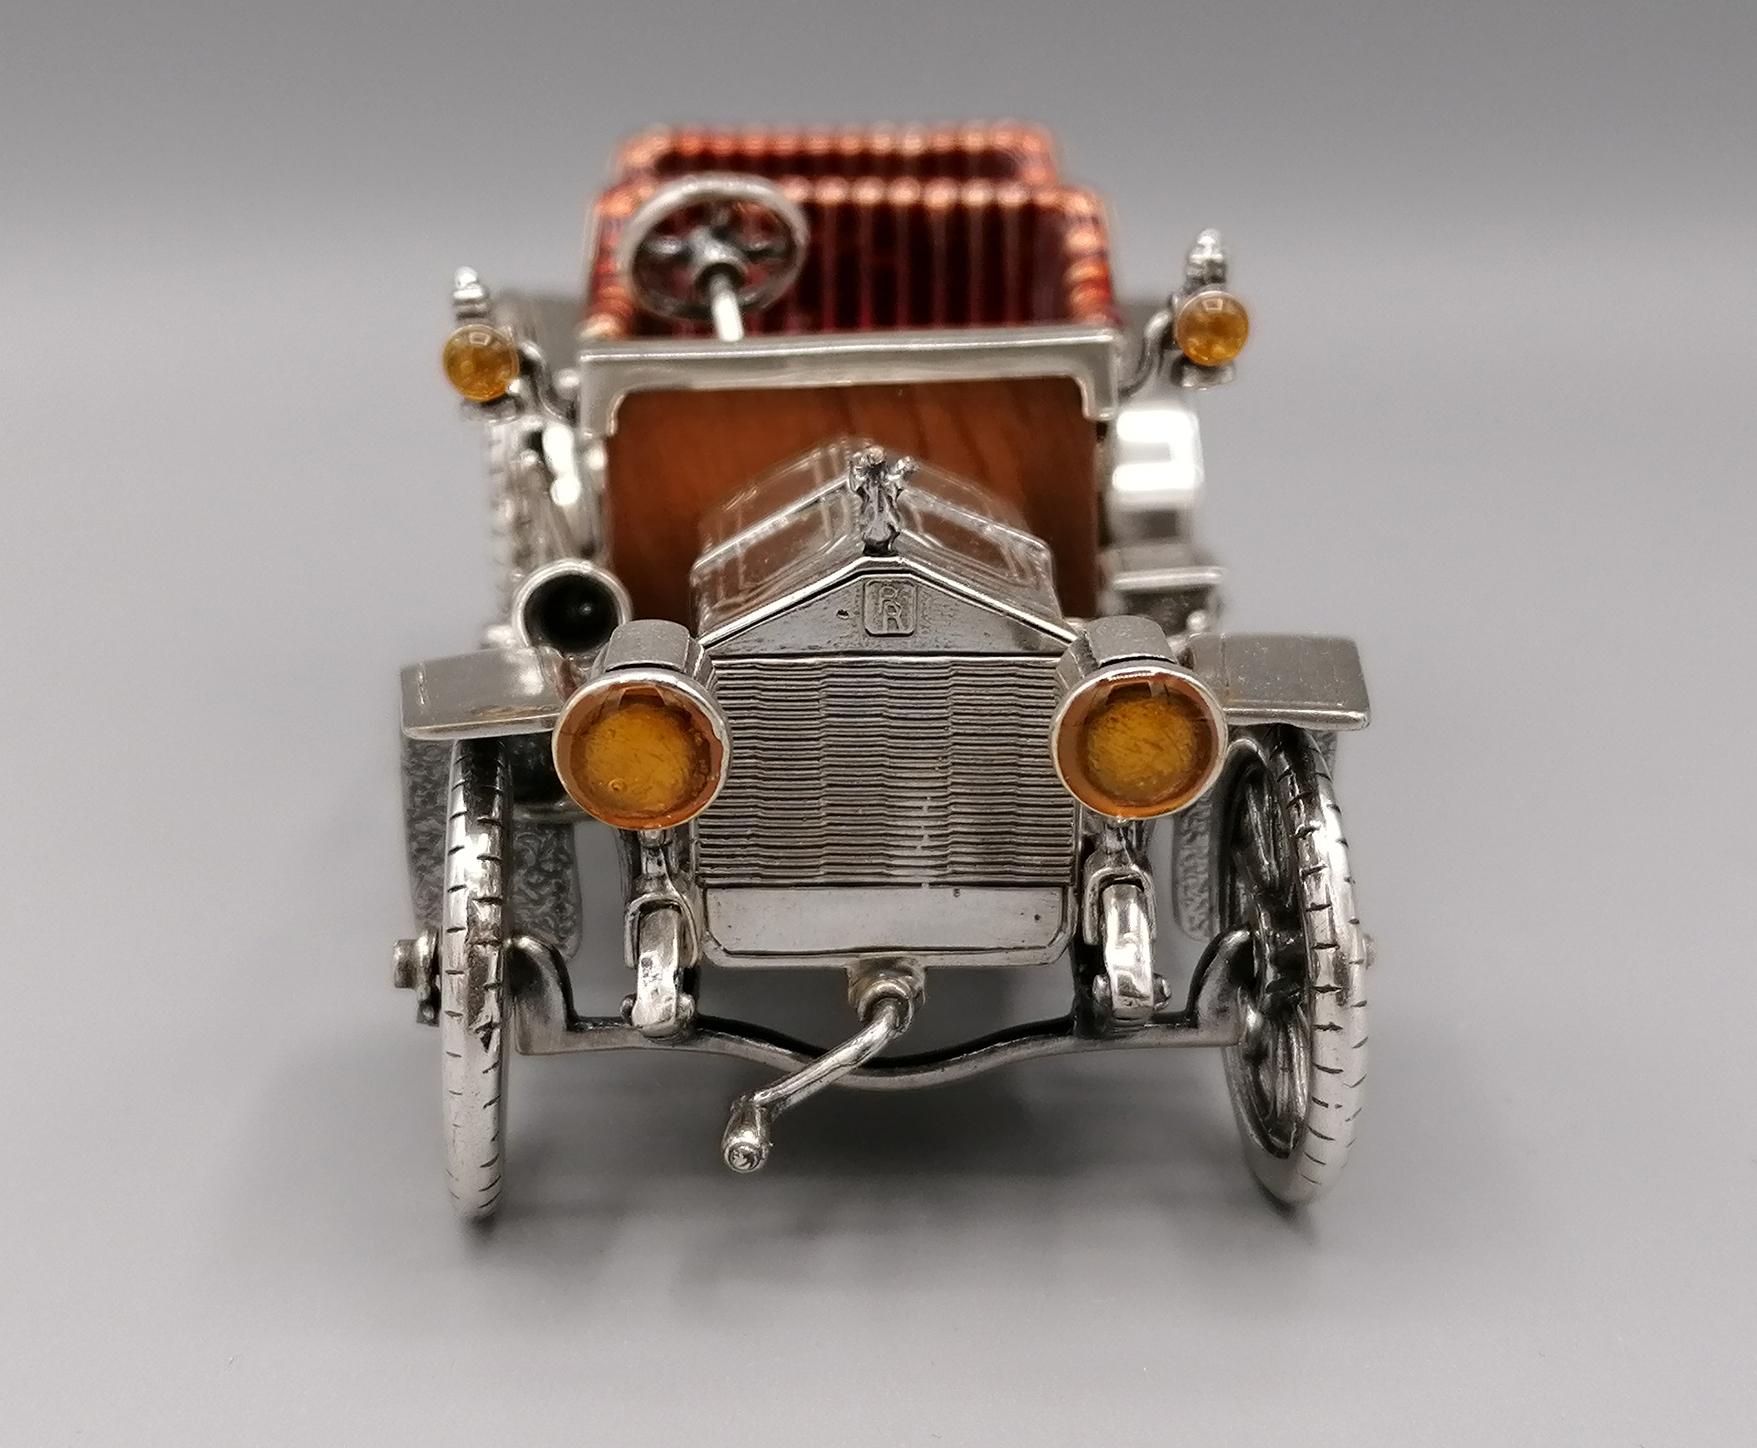 Handmade Rolls Royce car sterling silver model.
The details of the dashboard and the car floor are in briar wood.
The seats are enameled.